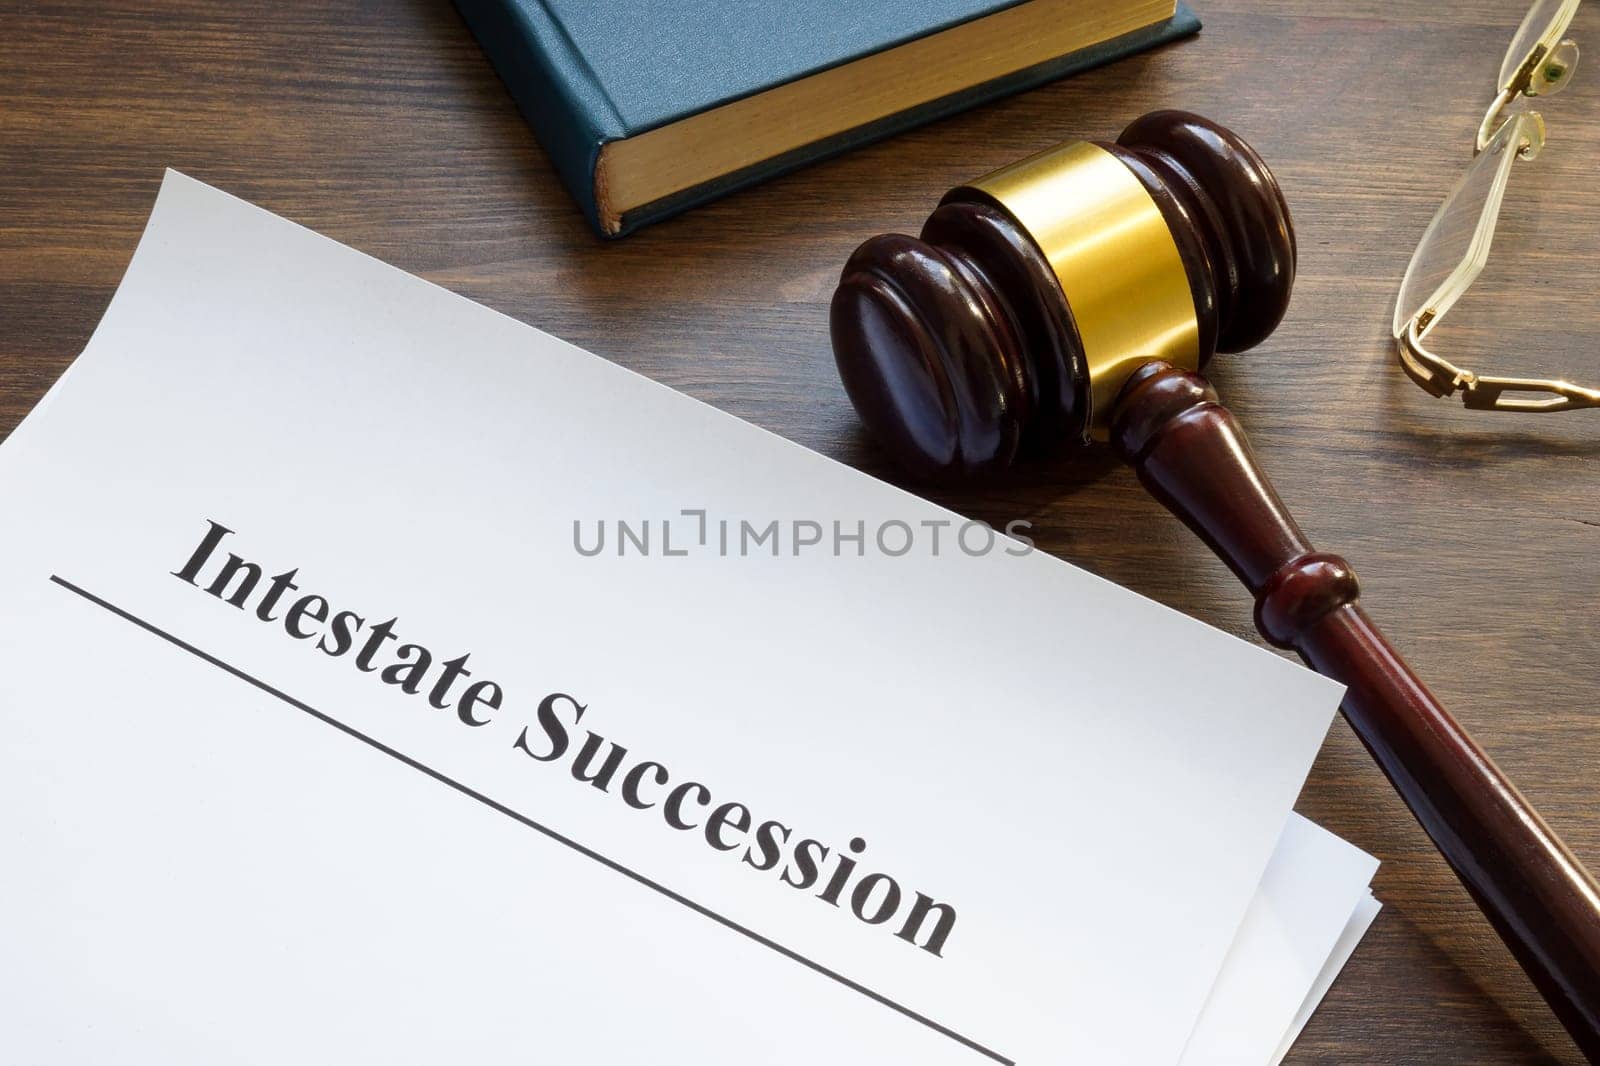 Intestate succession, a gavel and book on the table.